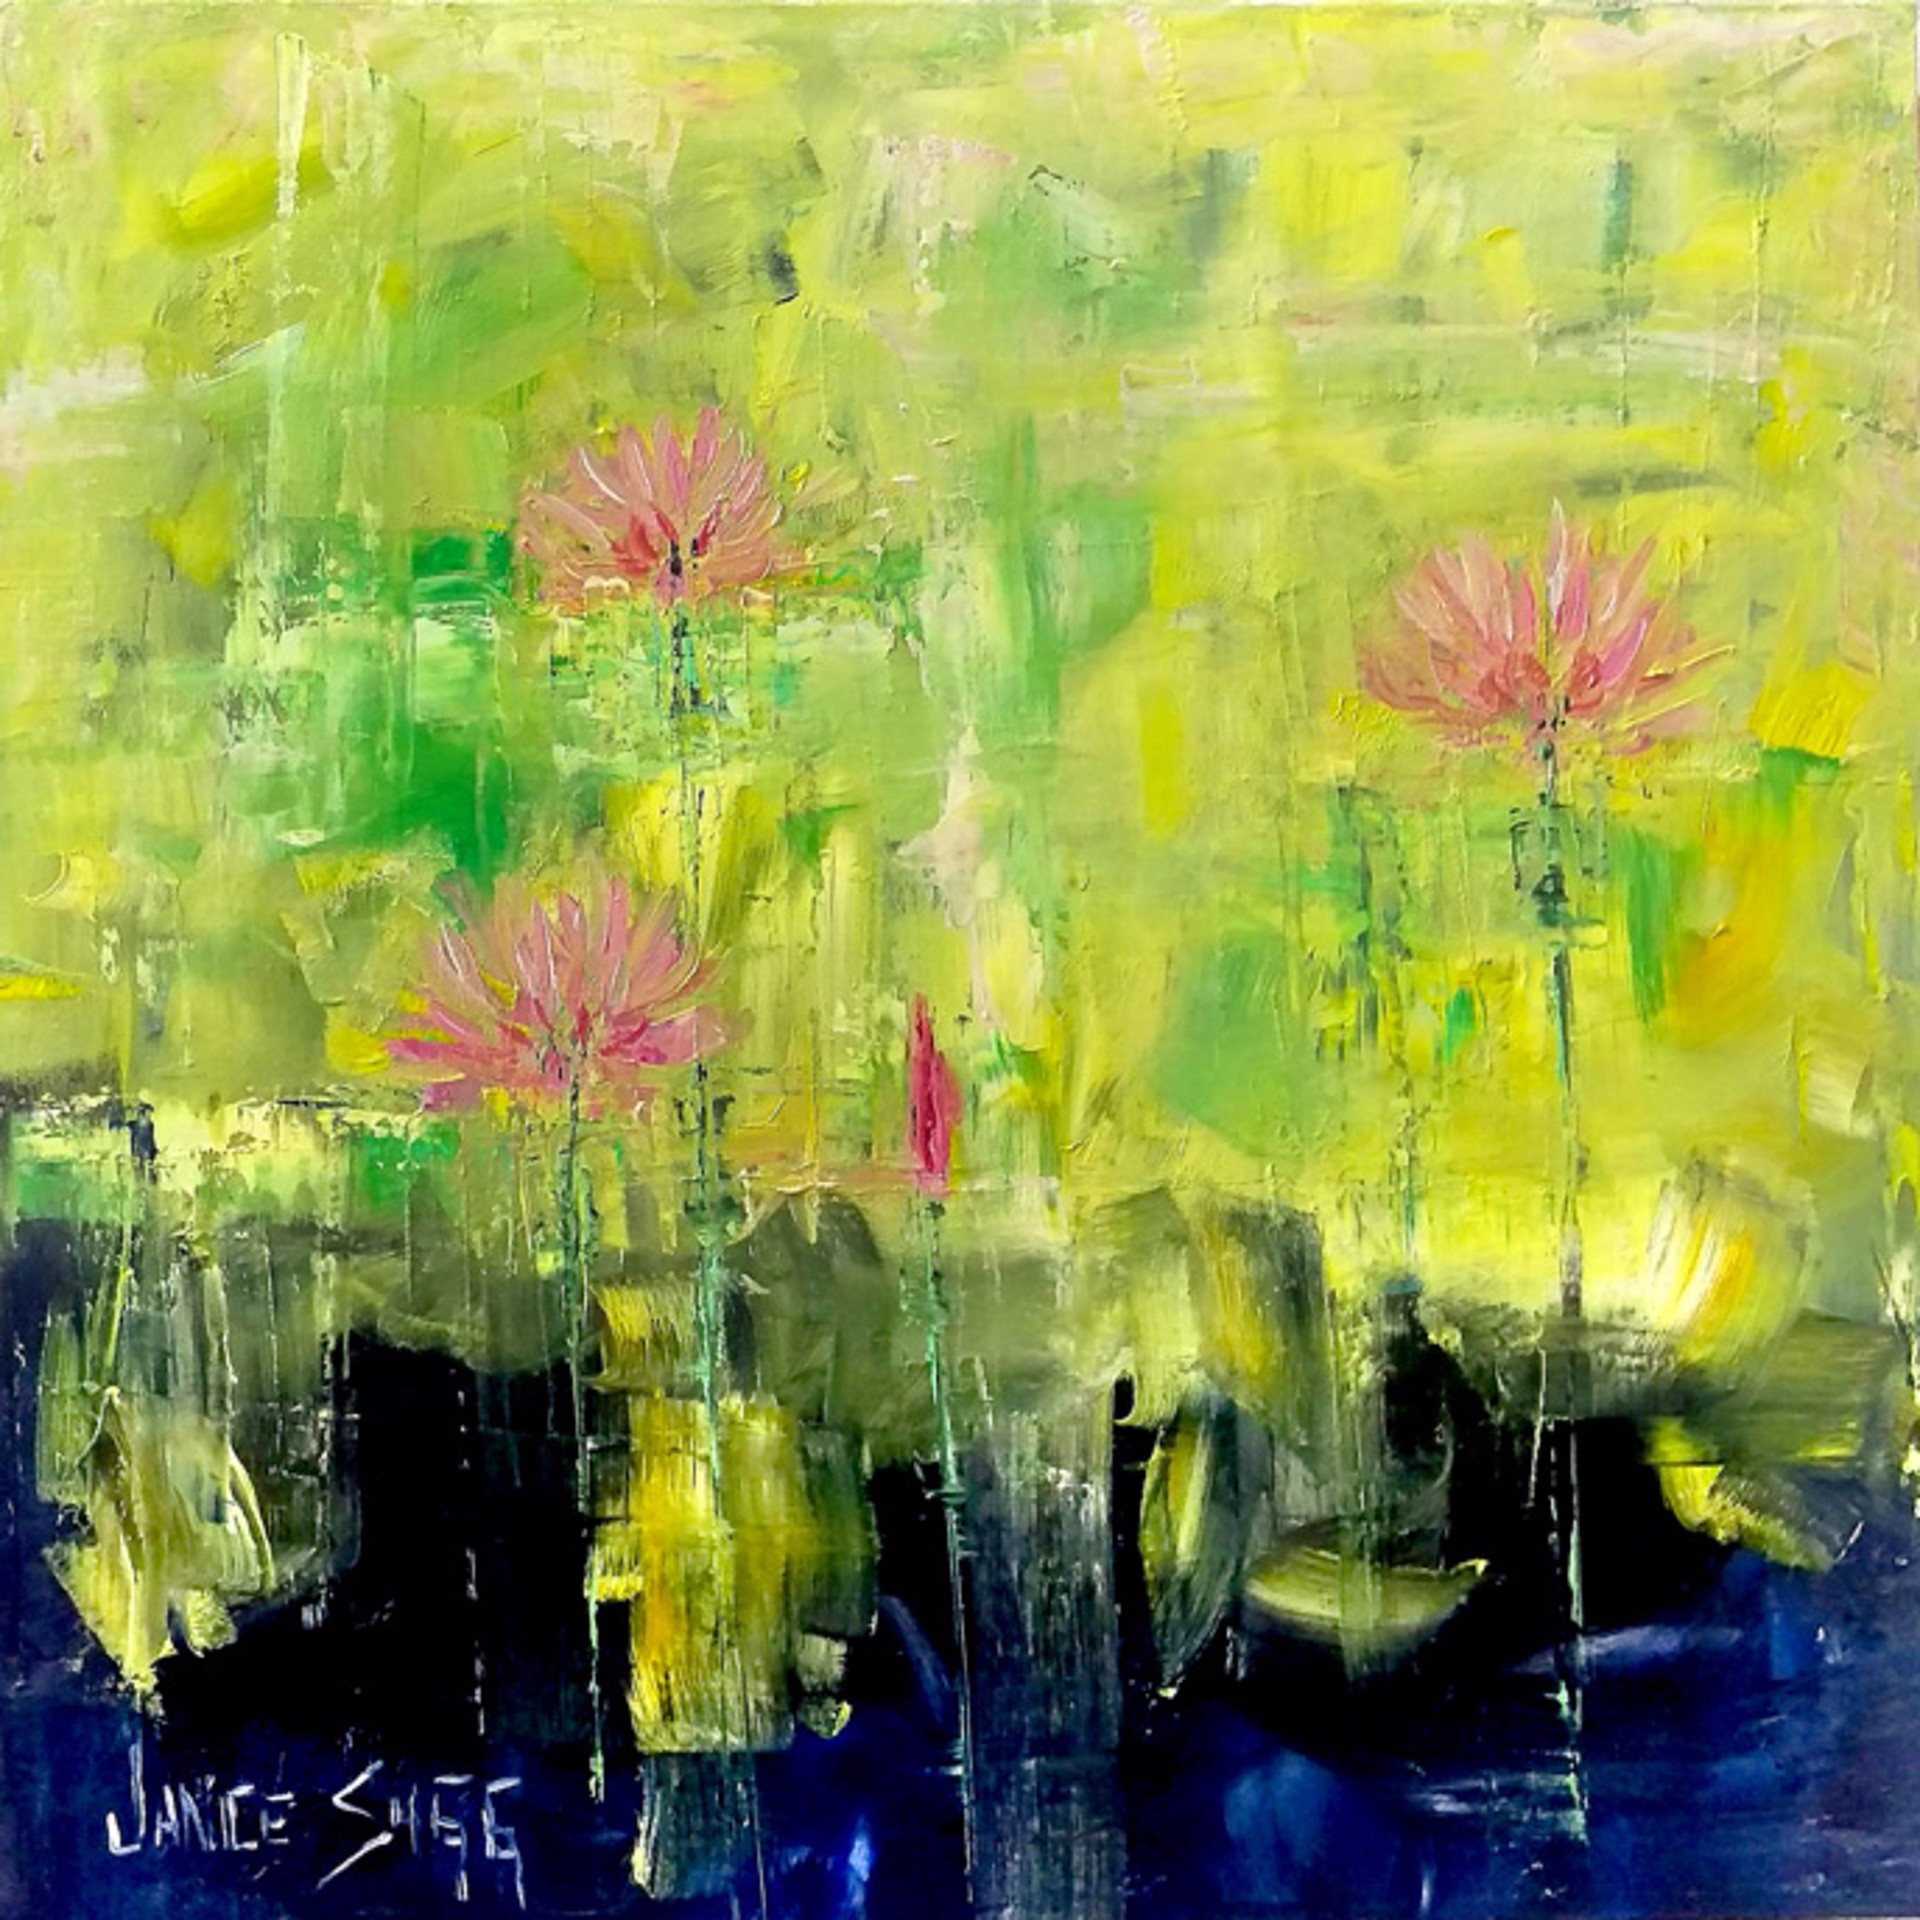 Deep Pond Pink Lily Patch by Janice SUGG